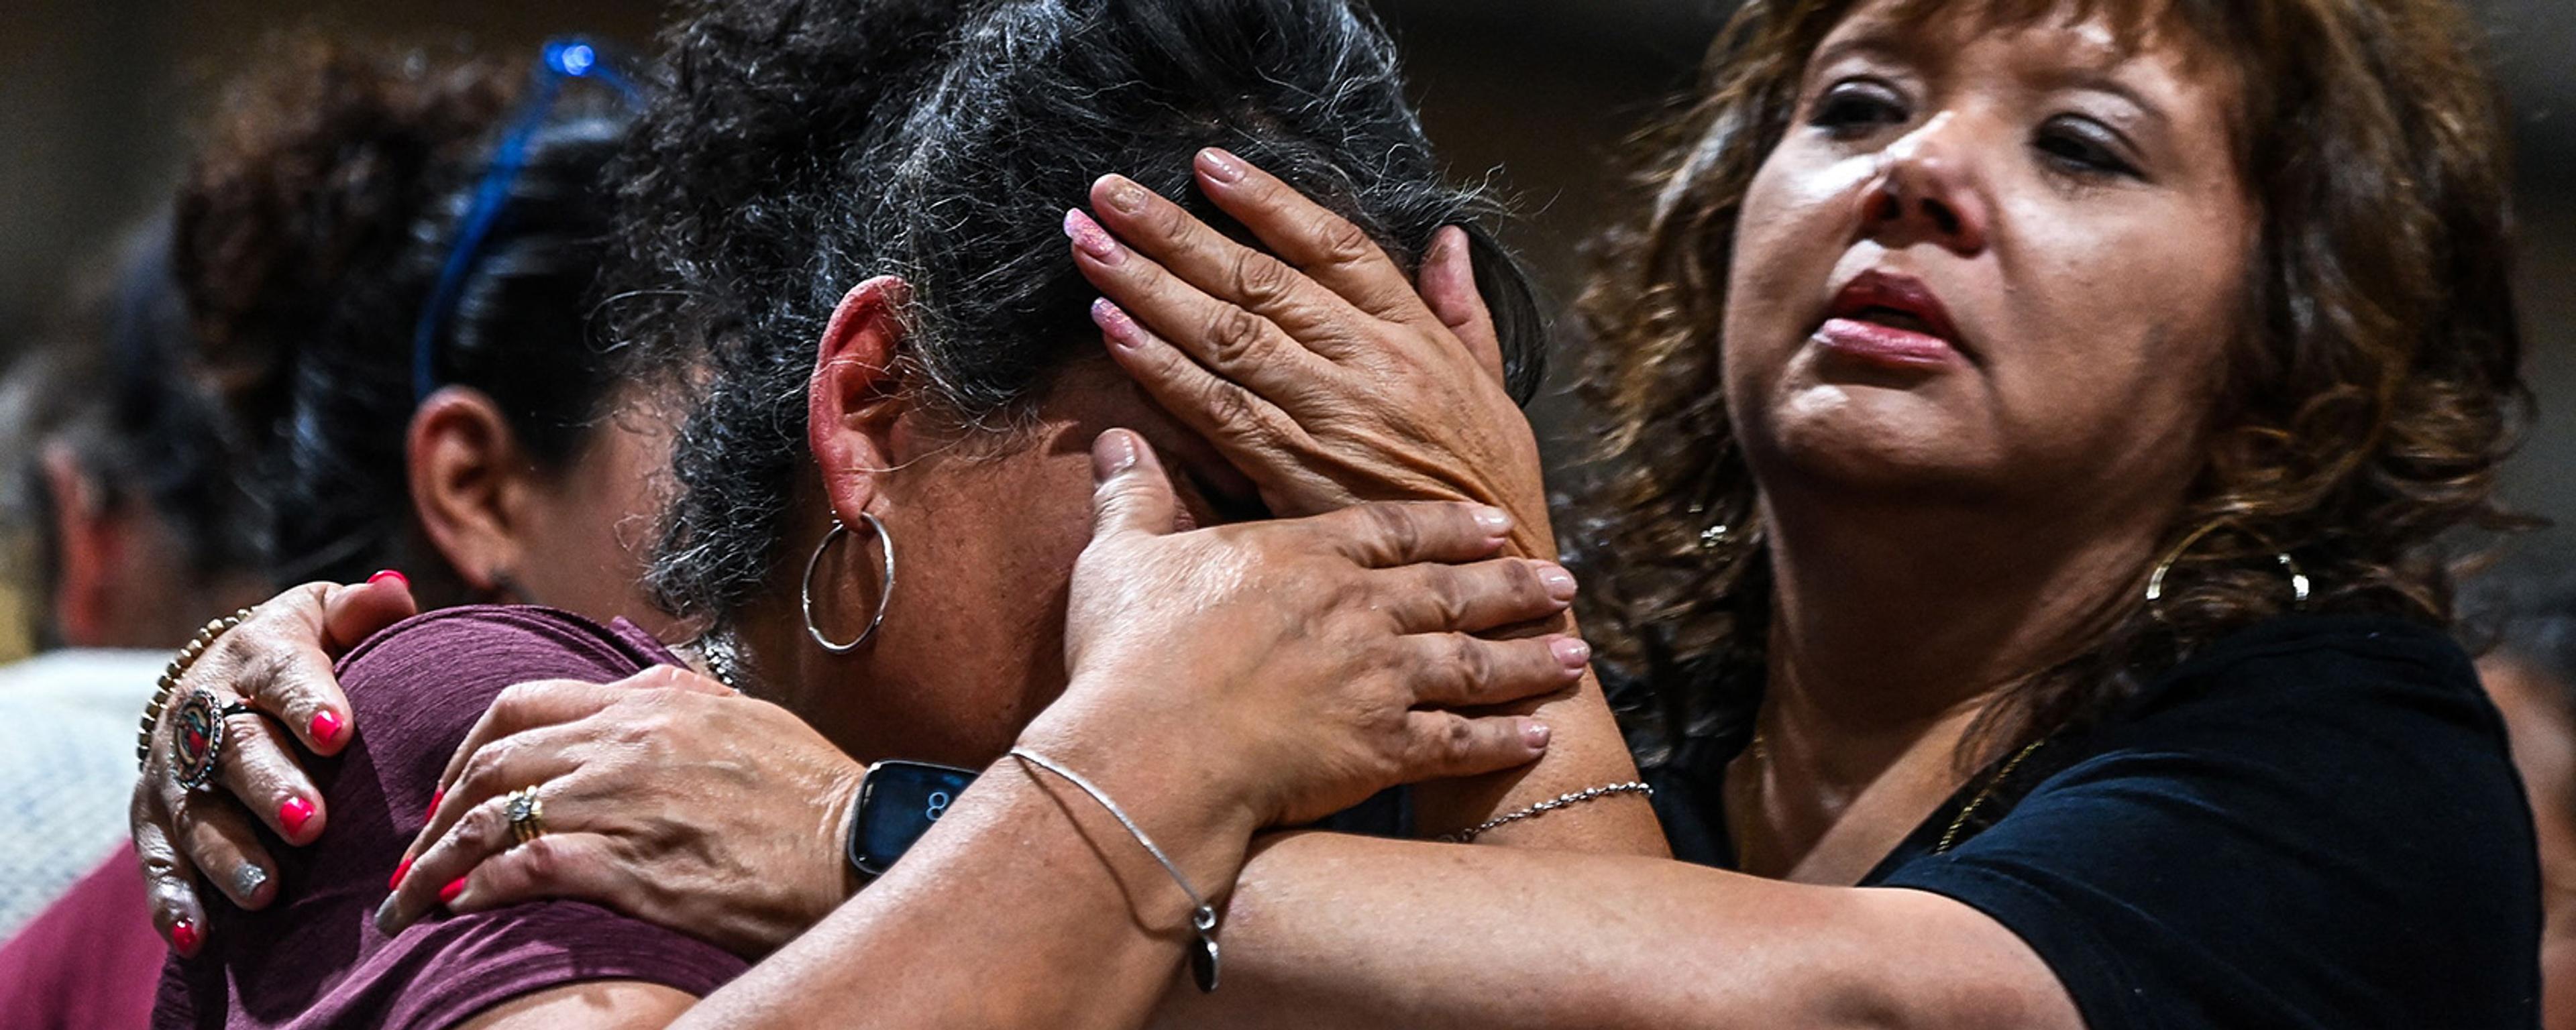 A close-up shot of one woman holding and comforting another grief-stricken woman